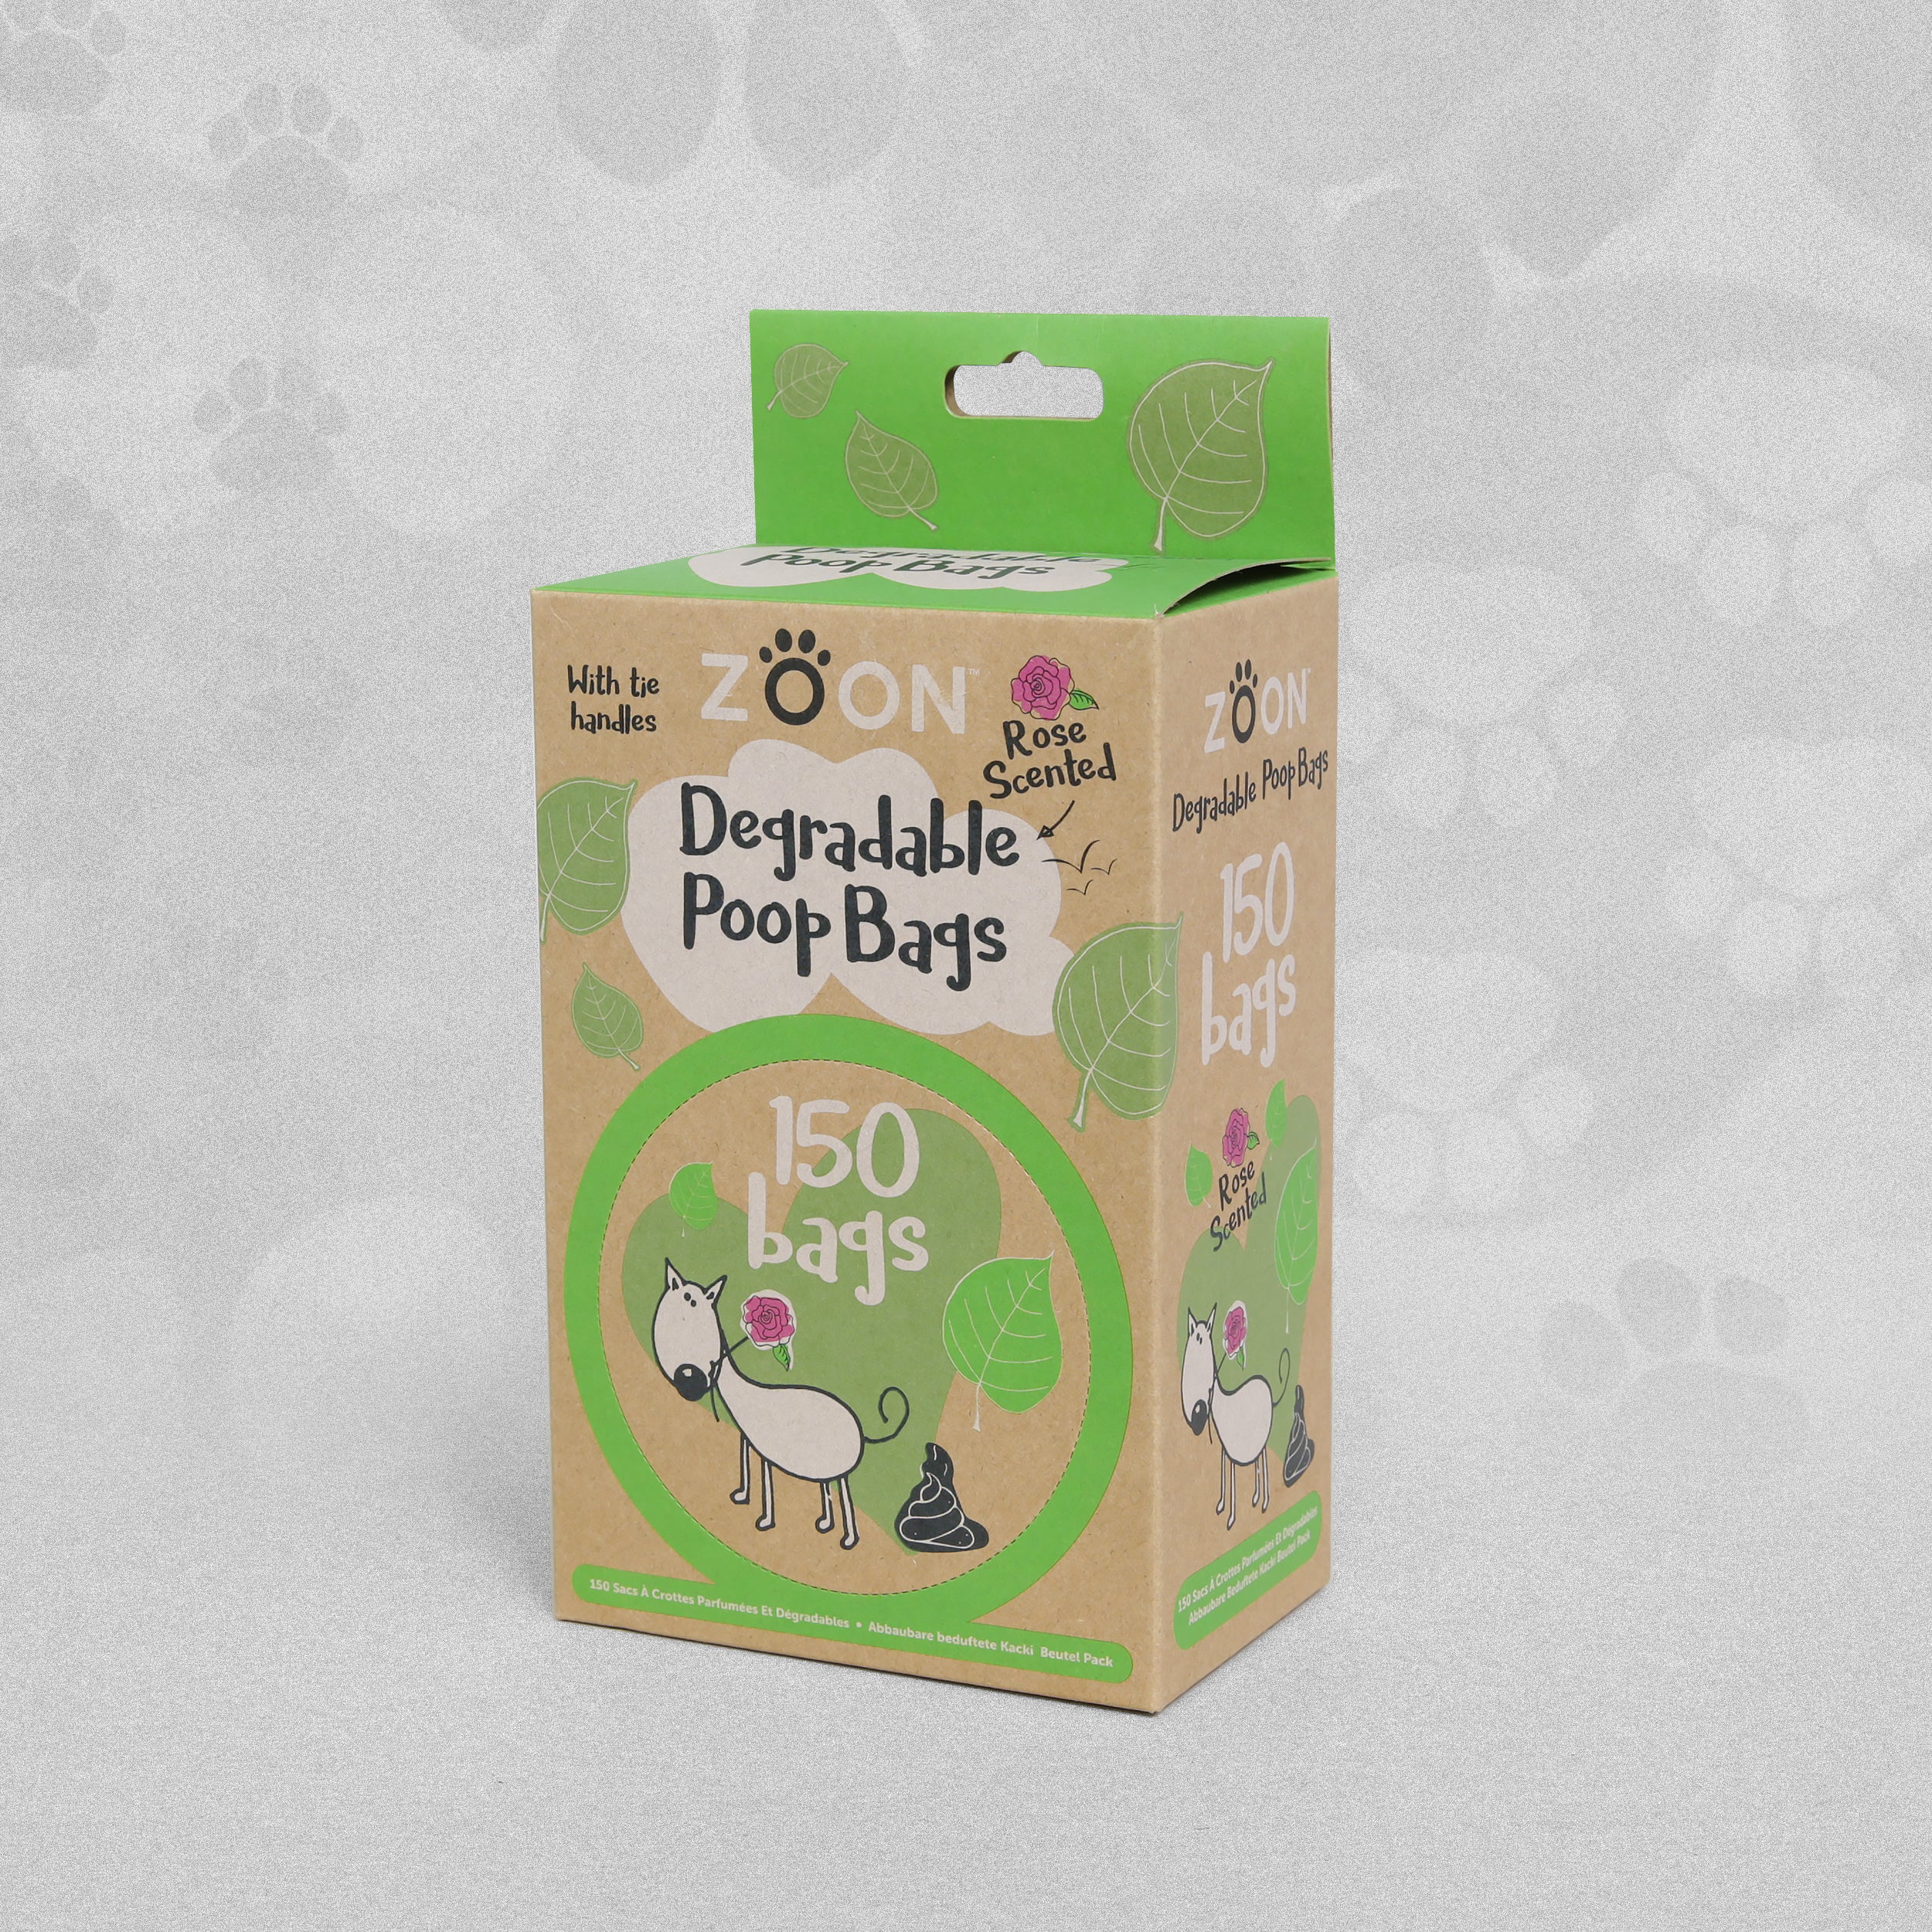 Zoon Degradable 150 Poop Bags - Rose Scented